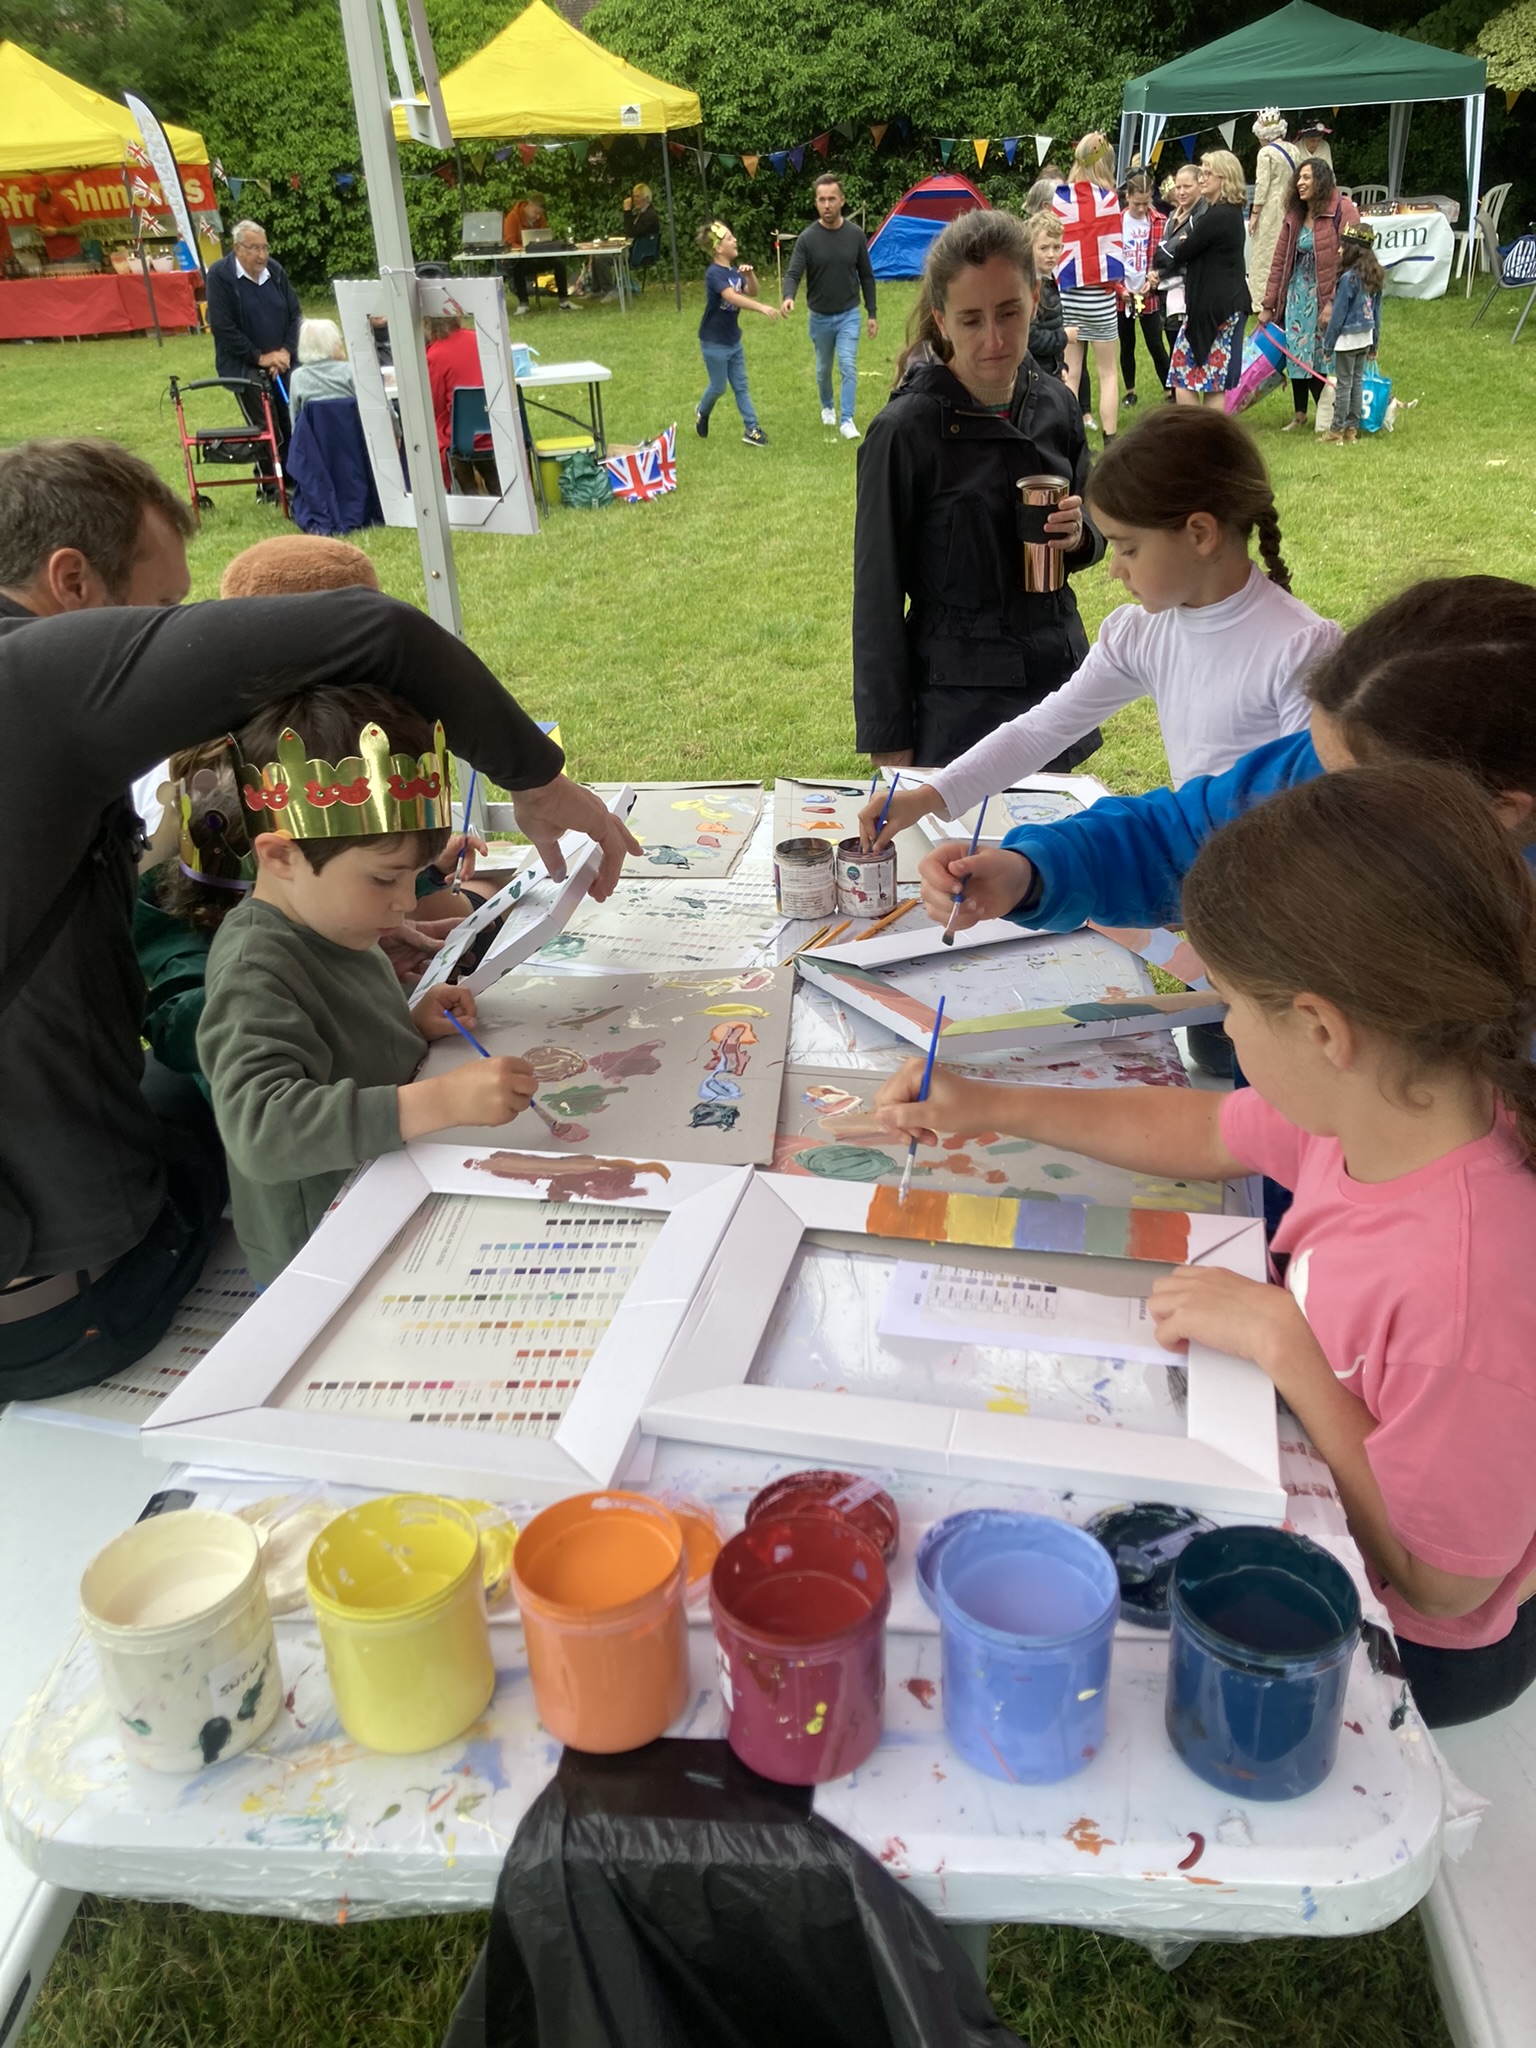 Children and adults painting frames on a table